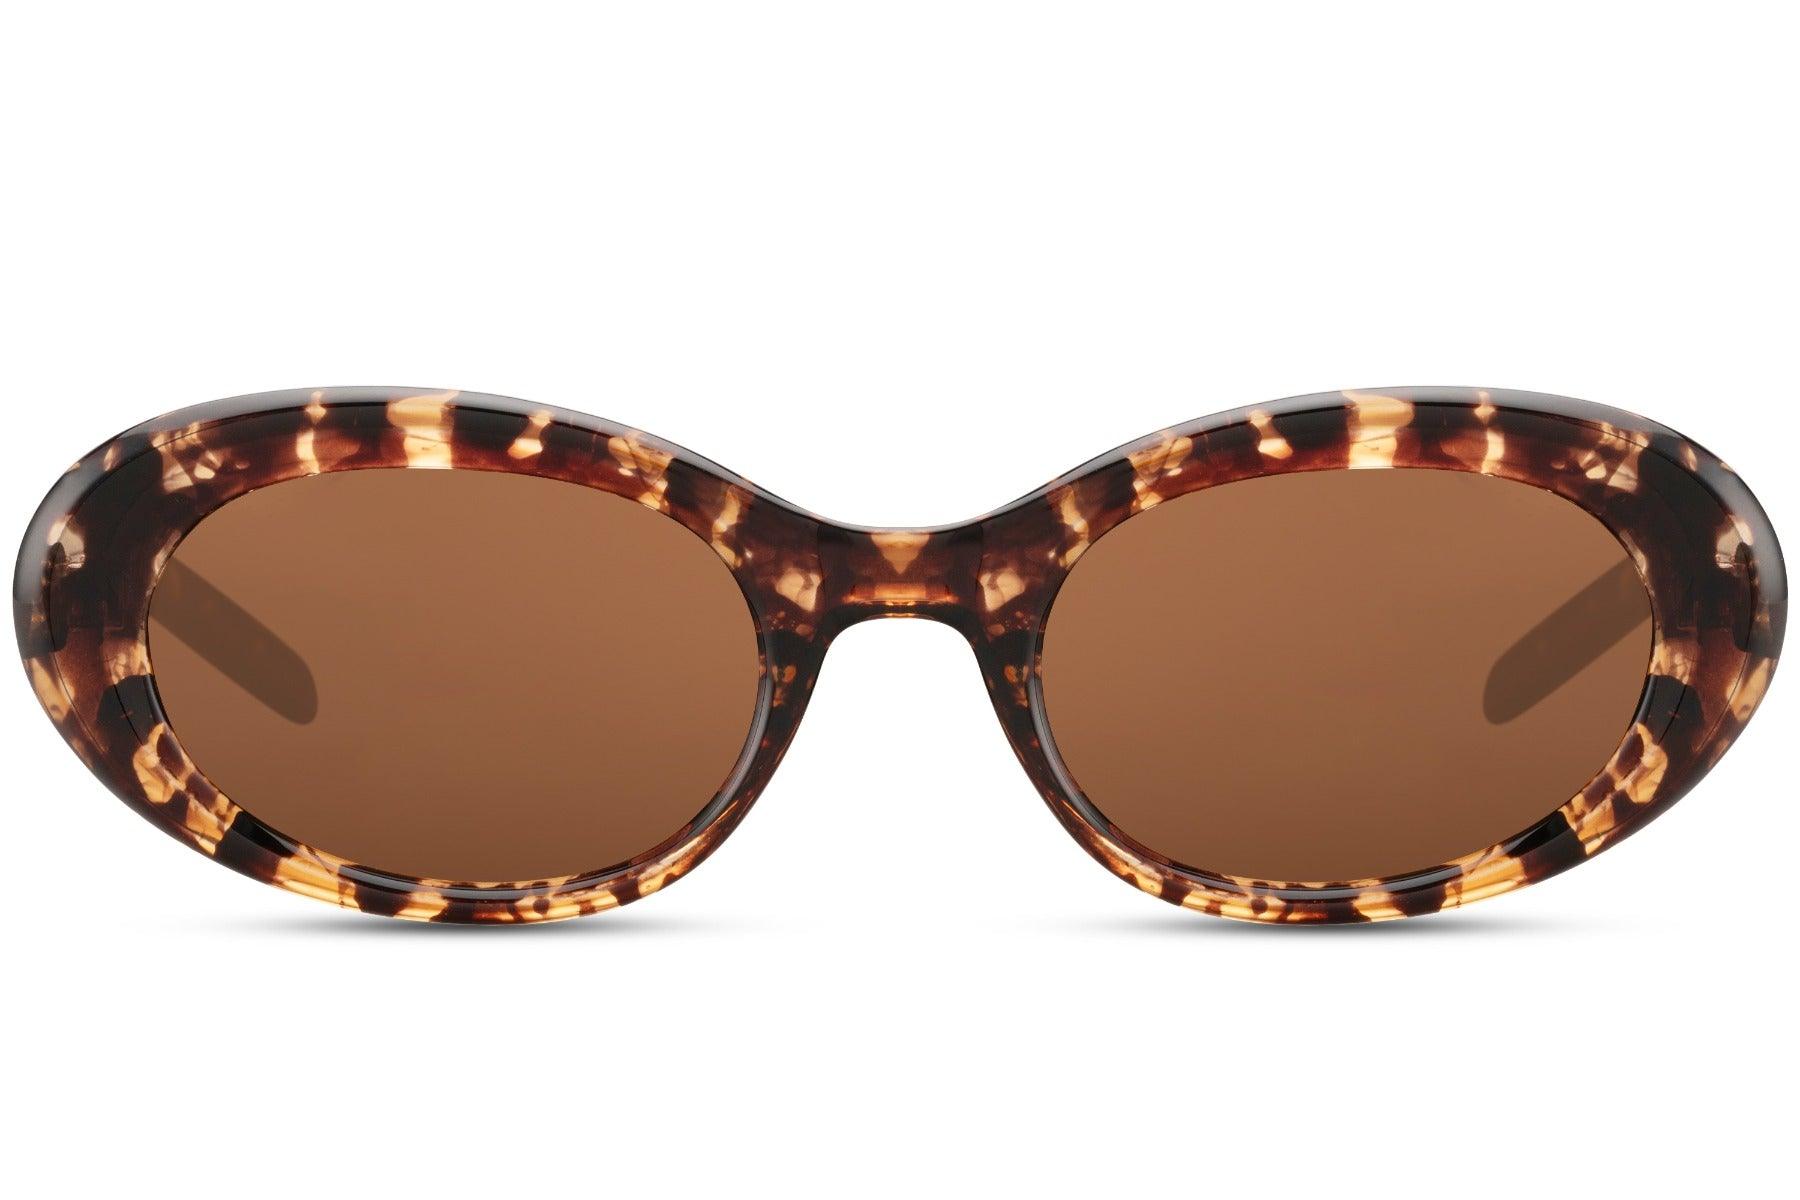 Pulp Tortoise Round Mod Sunglasses - Blissfully Brand - Circle Retro Funky Brown Oval